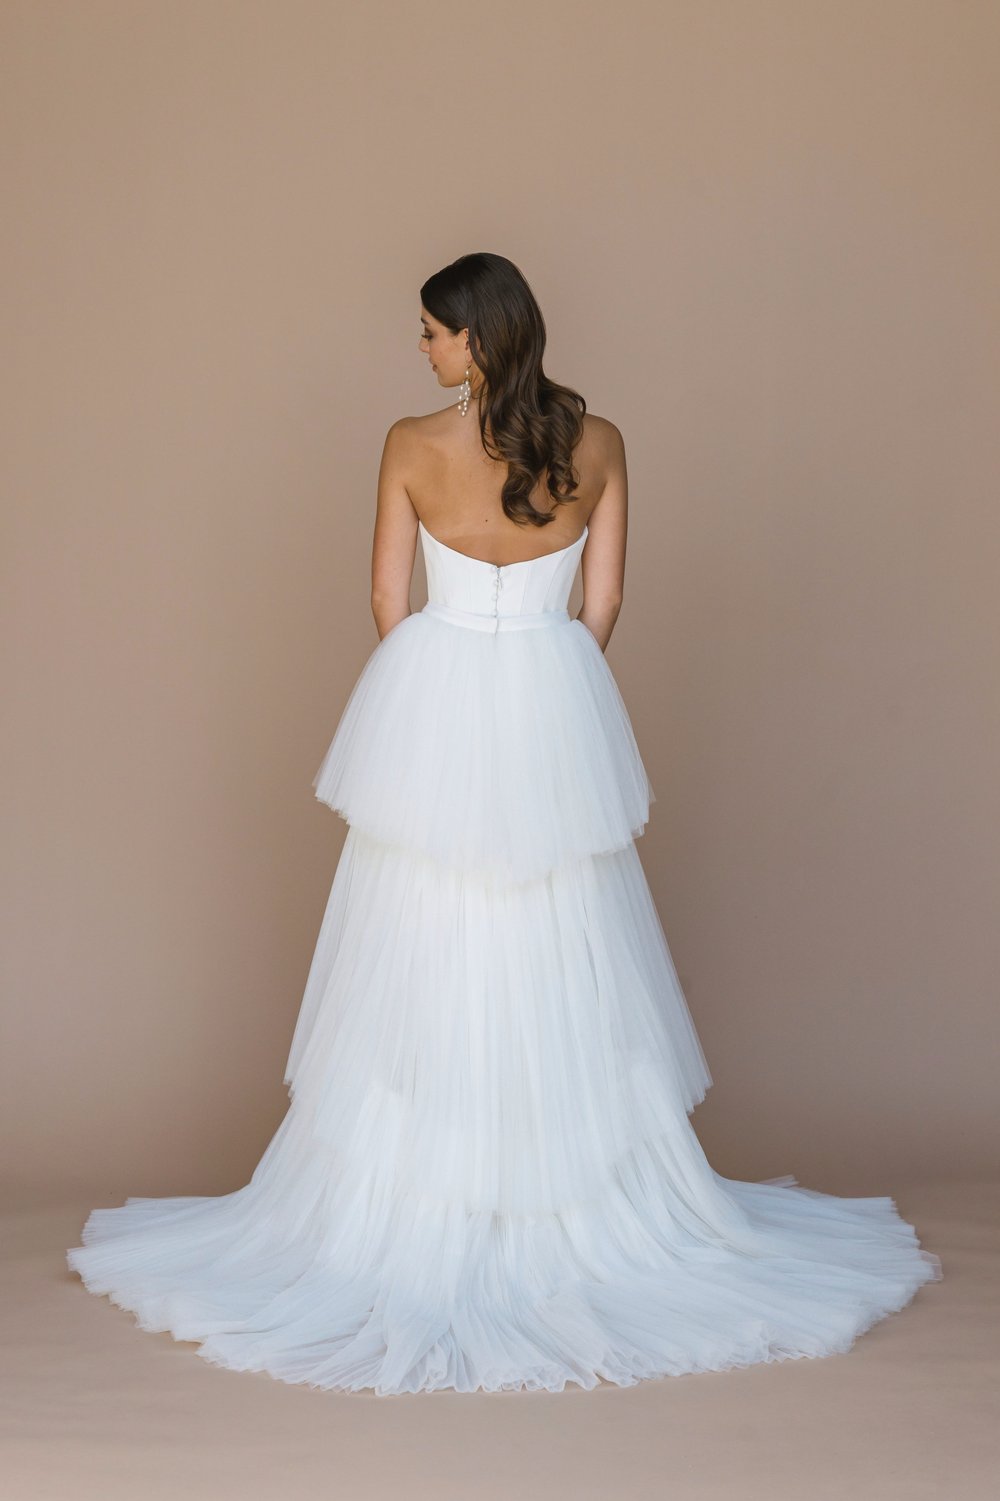 The Most Brilliant Bridal Trends for 2023 - Ruffles